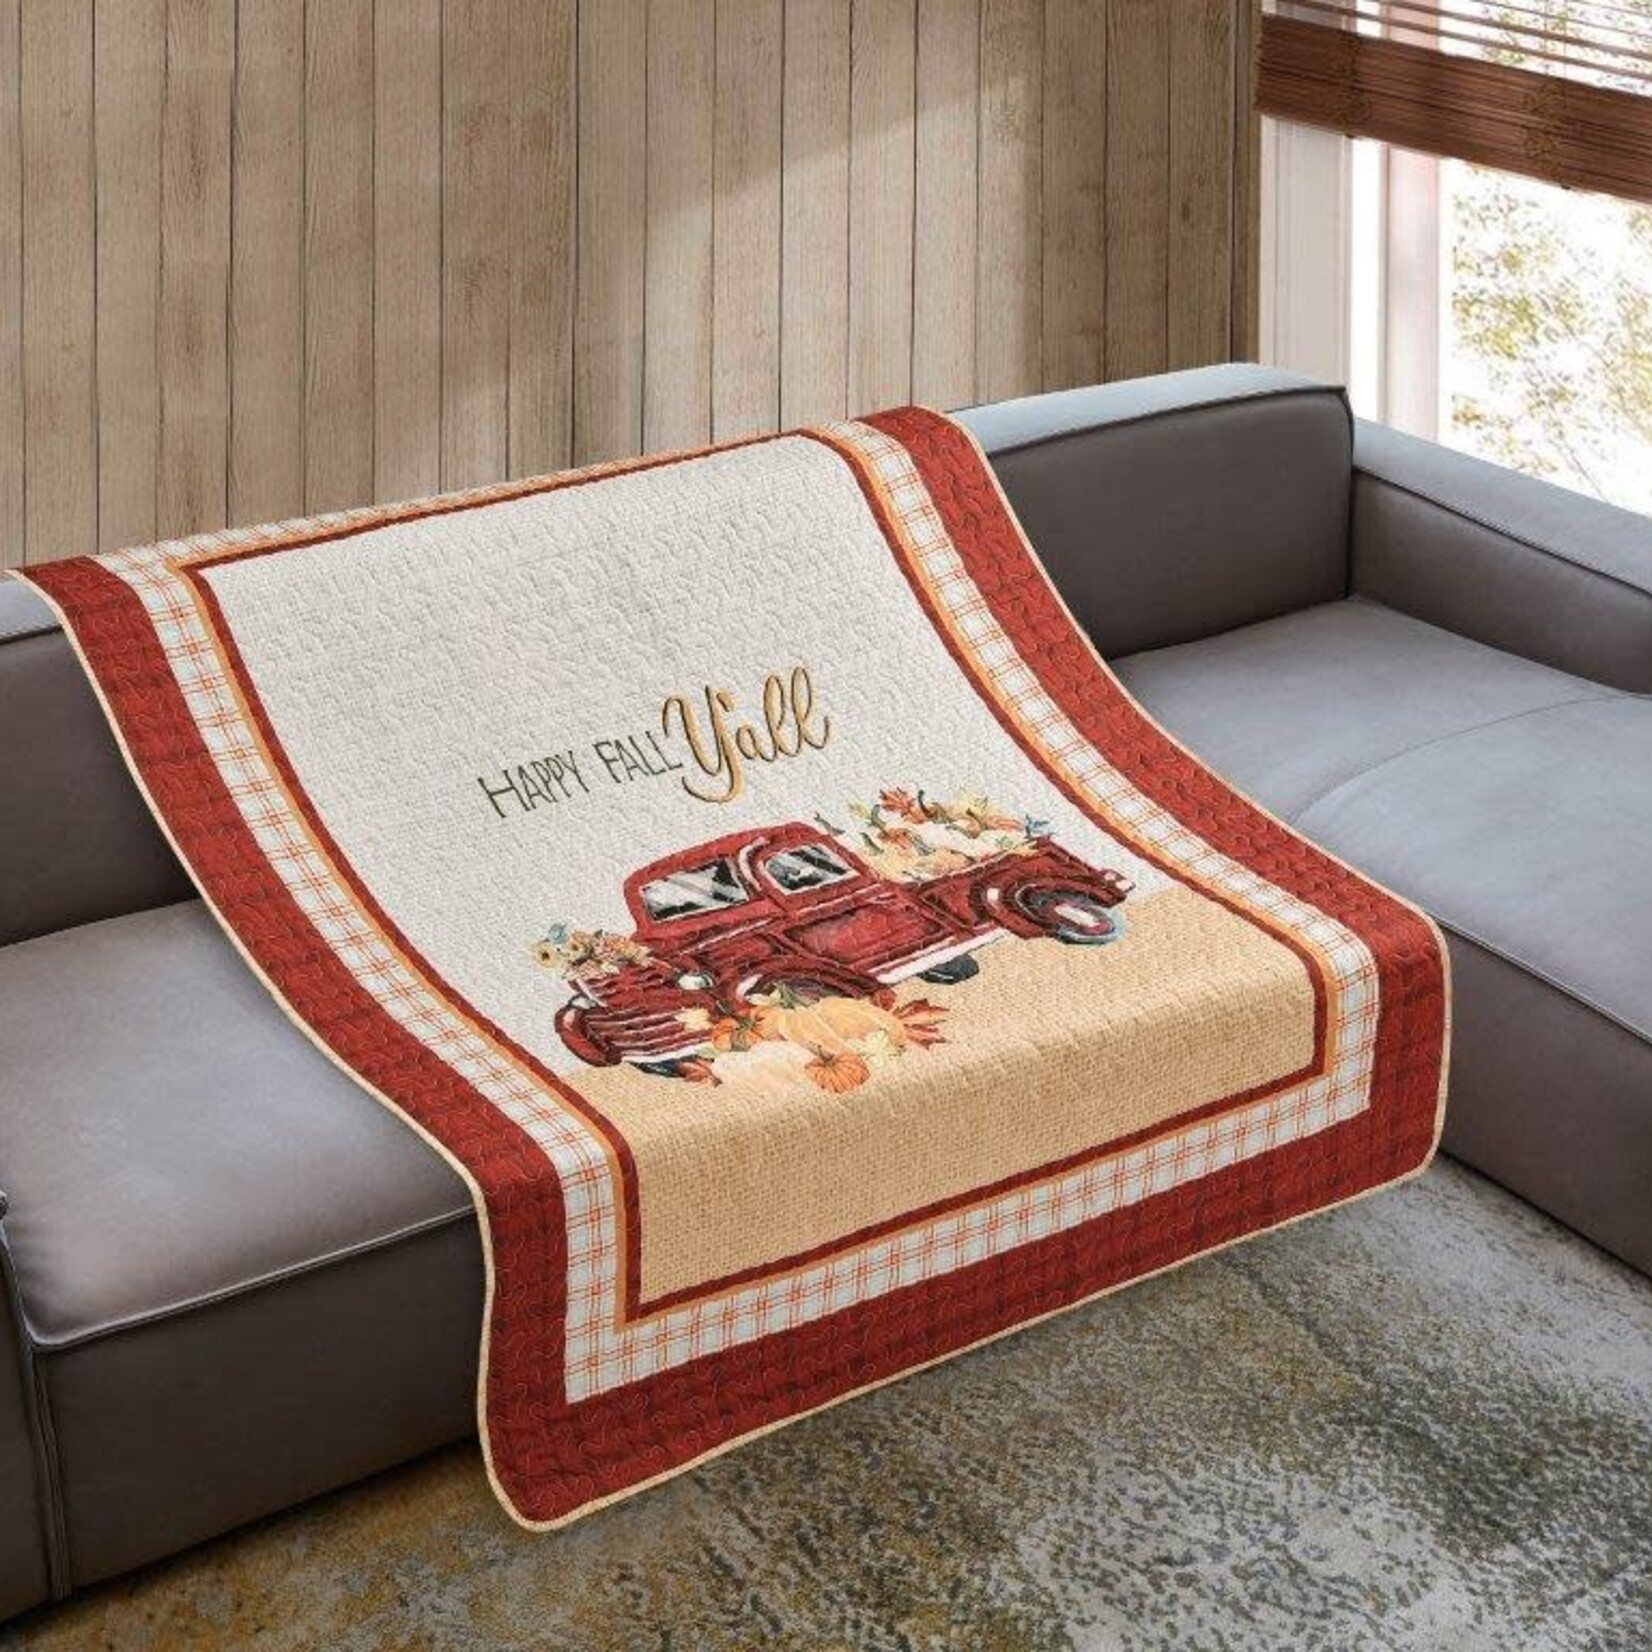 Quilt Inc. DQT10108 Happy Fall Y'all Quilt Throw